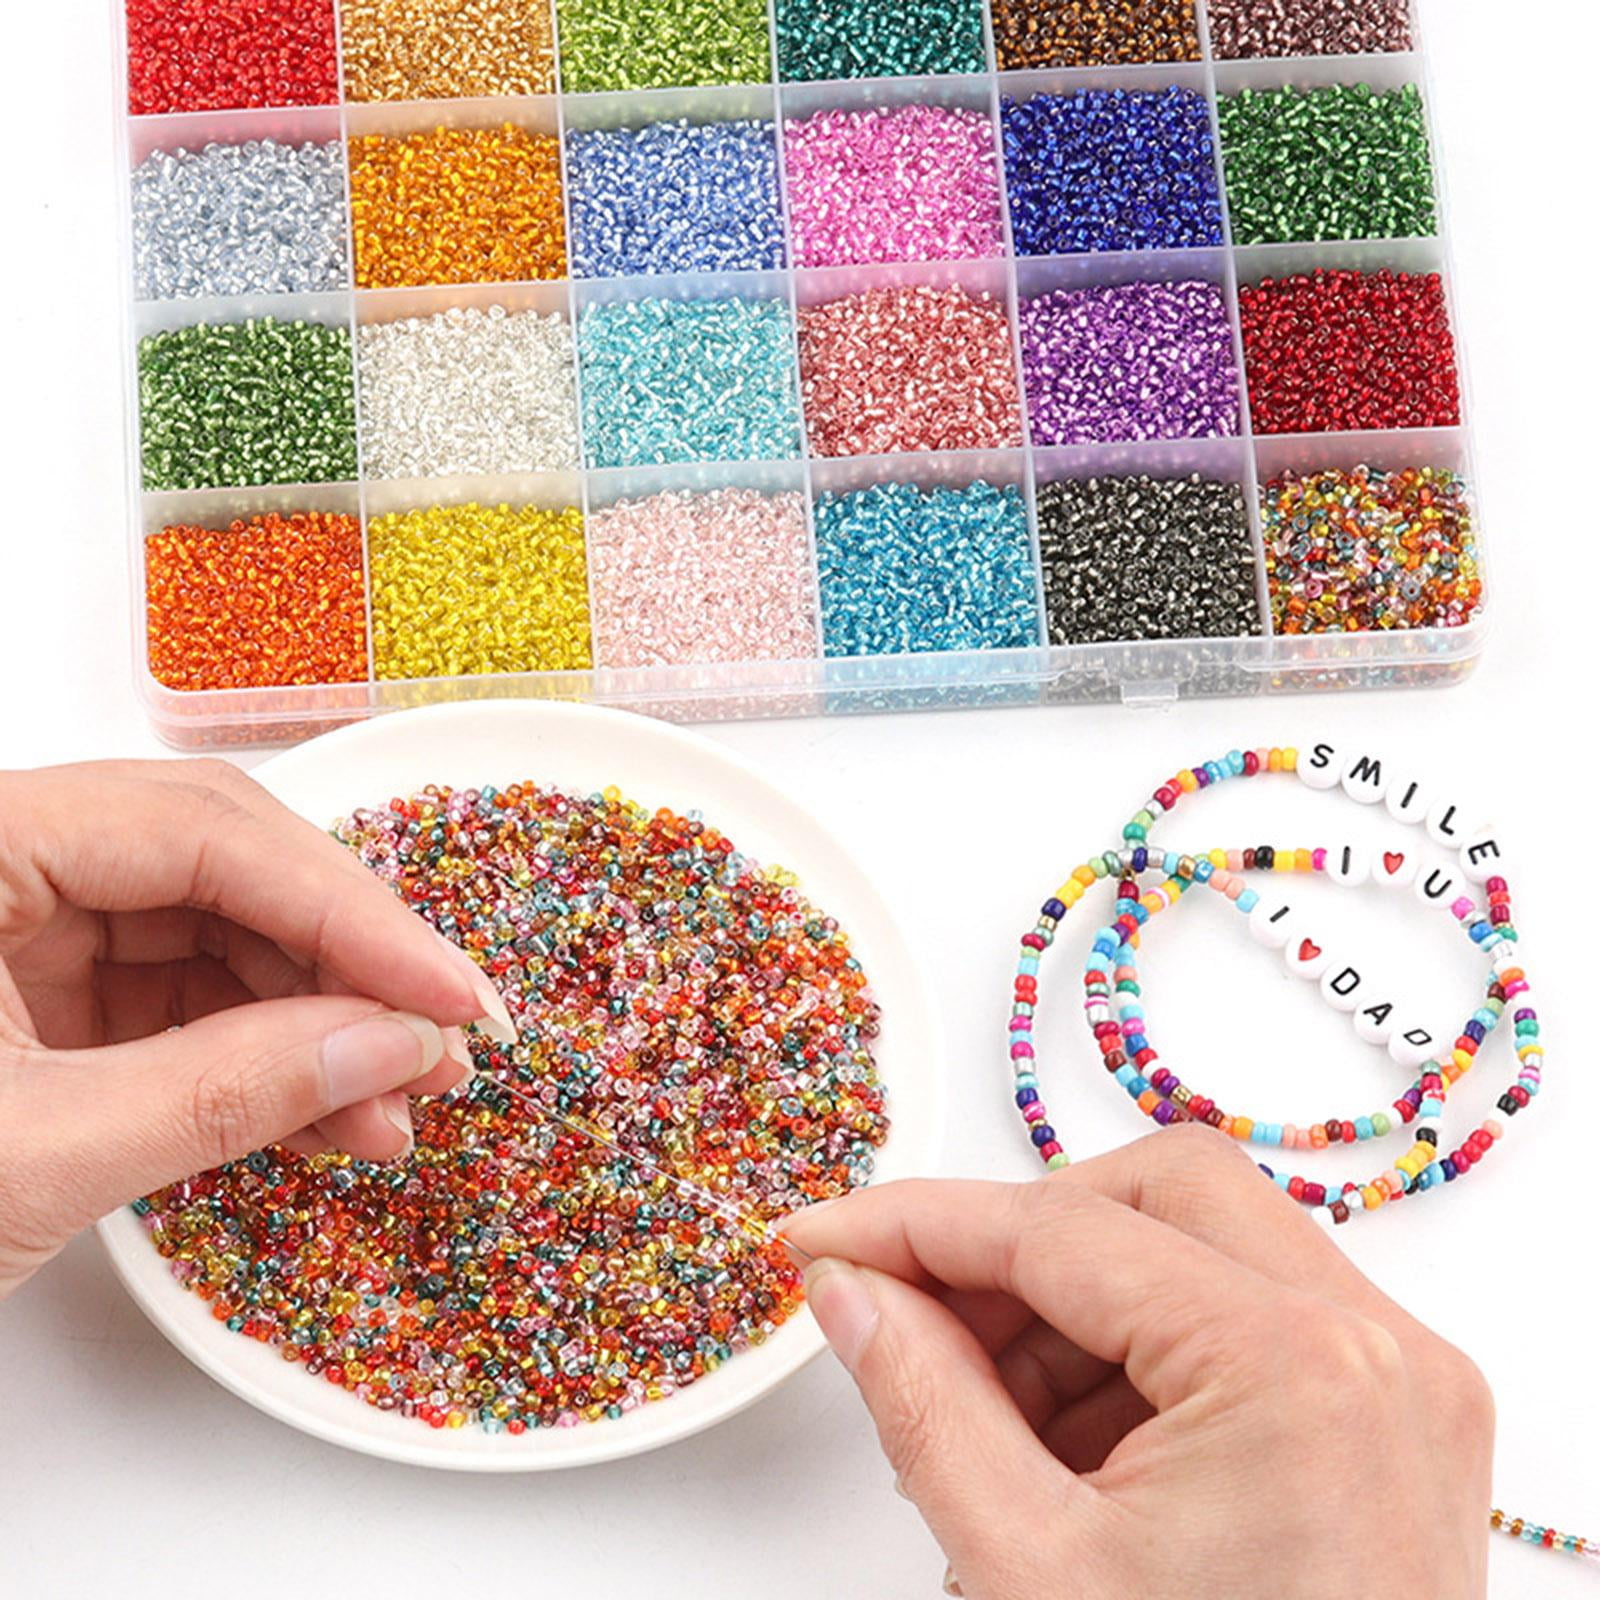 23000pcs 2mm Glass Seed Beads for Jewelry Making Small Beads for Jewelry Making Tiny Beads Mixed Beads, Size: 2 mm